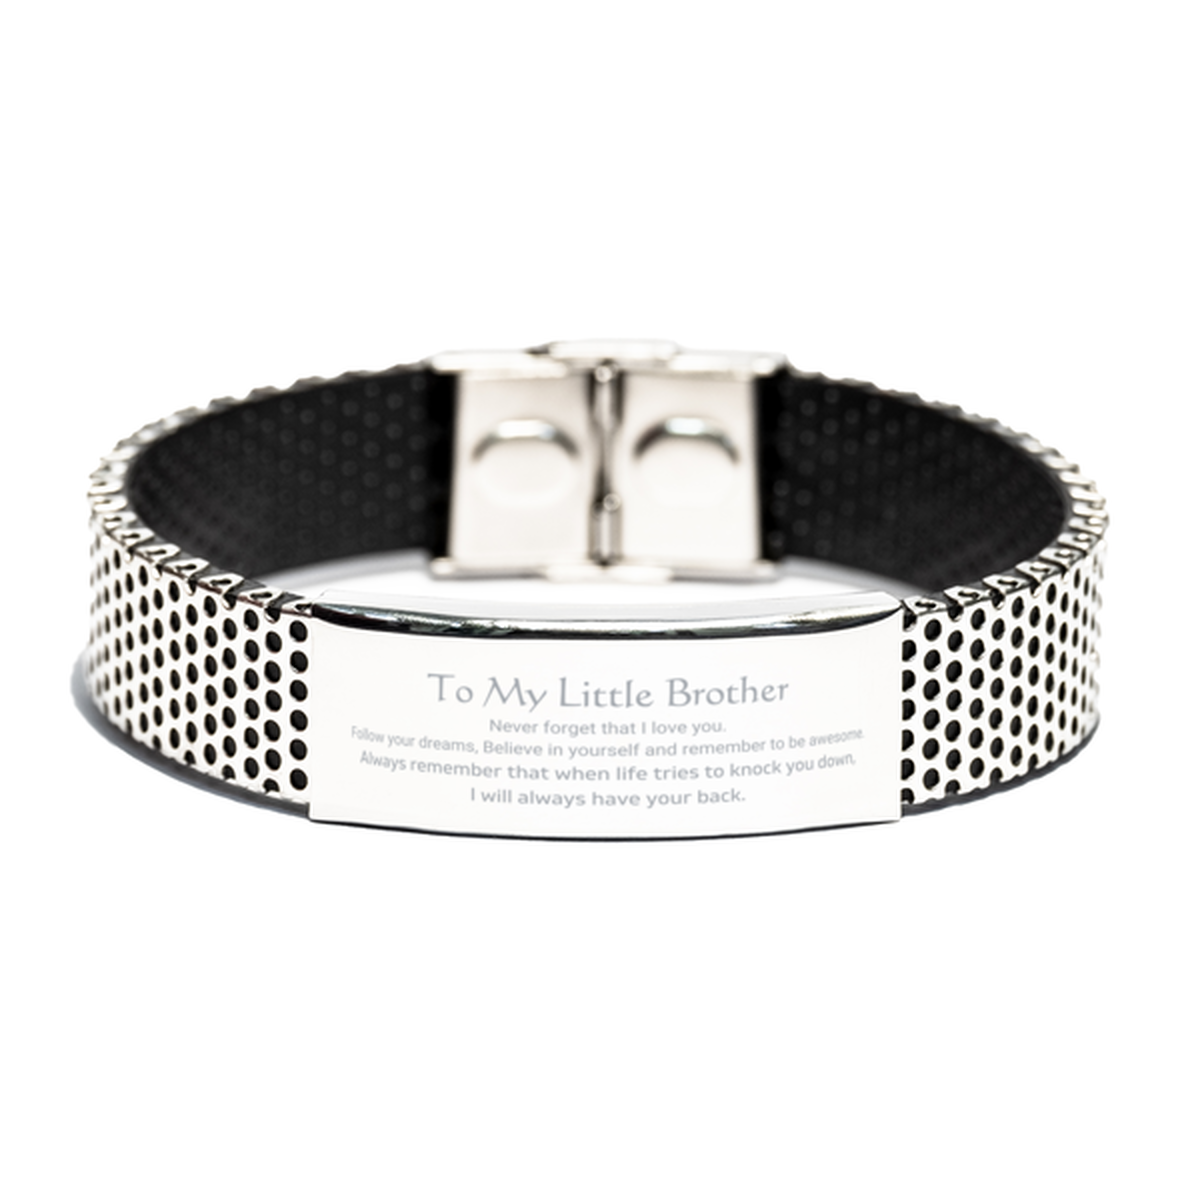 Inspirational Gifts for Little Brother, Follow your dreams, Believe in yourself, Little Brother Stainless Steel Bracelet, Birthday Christmas Unique Gifts For Little Brother